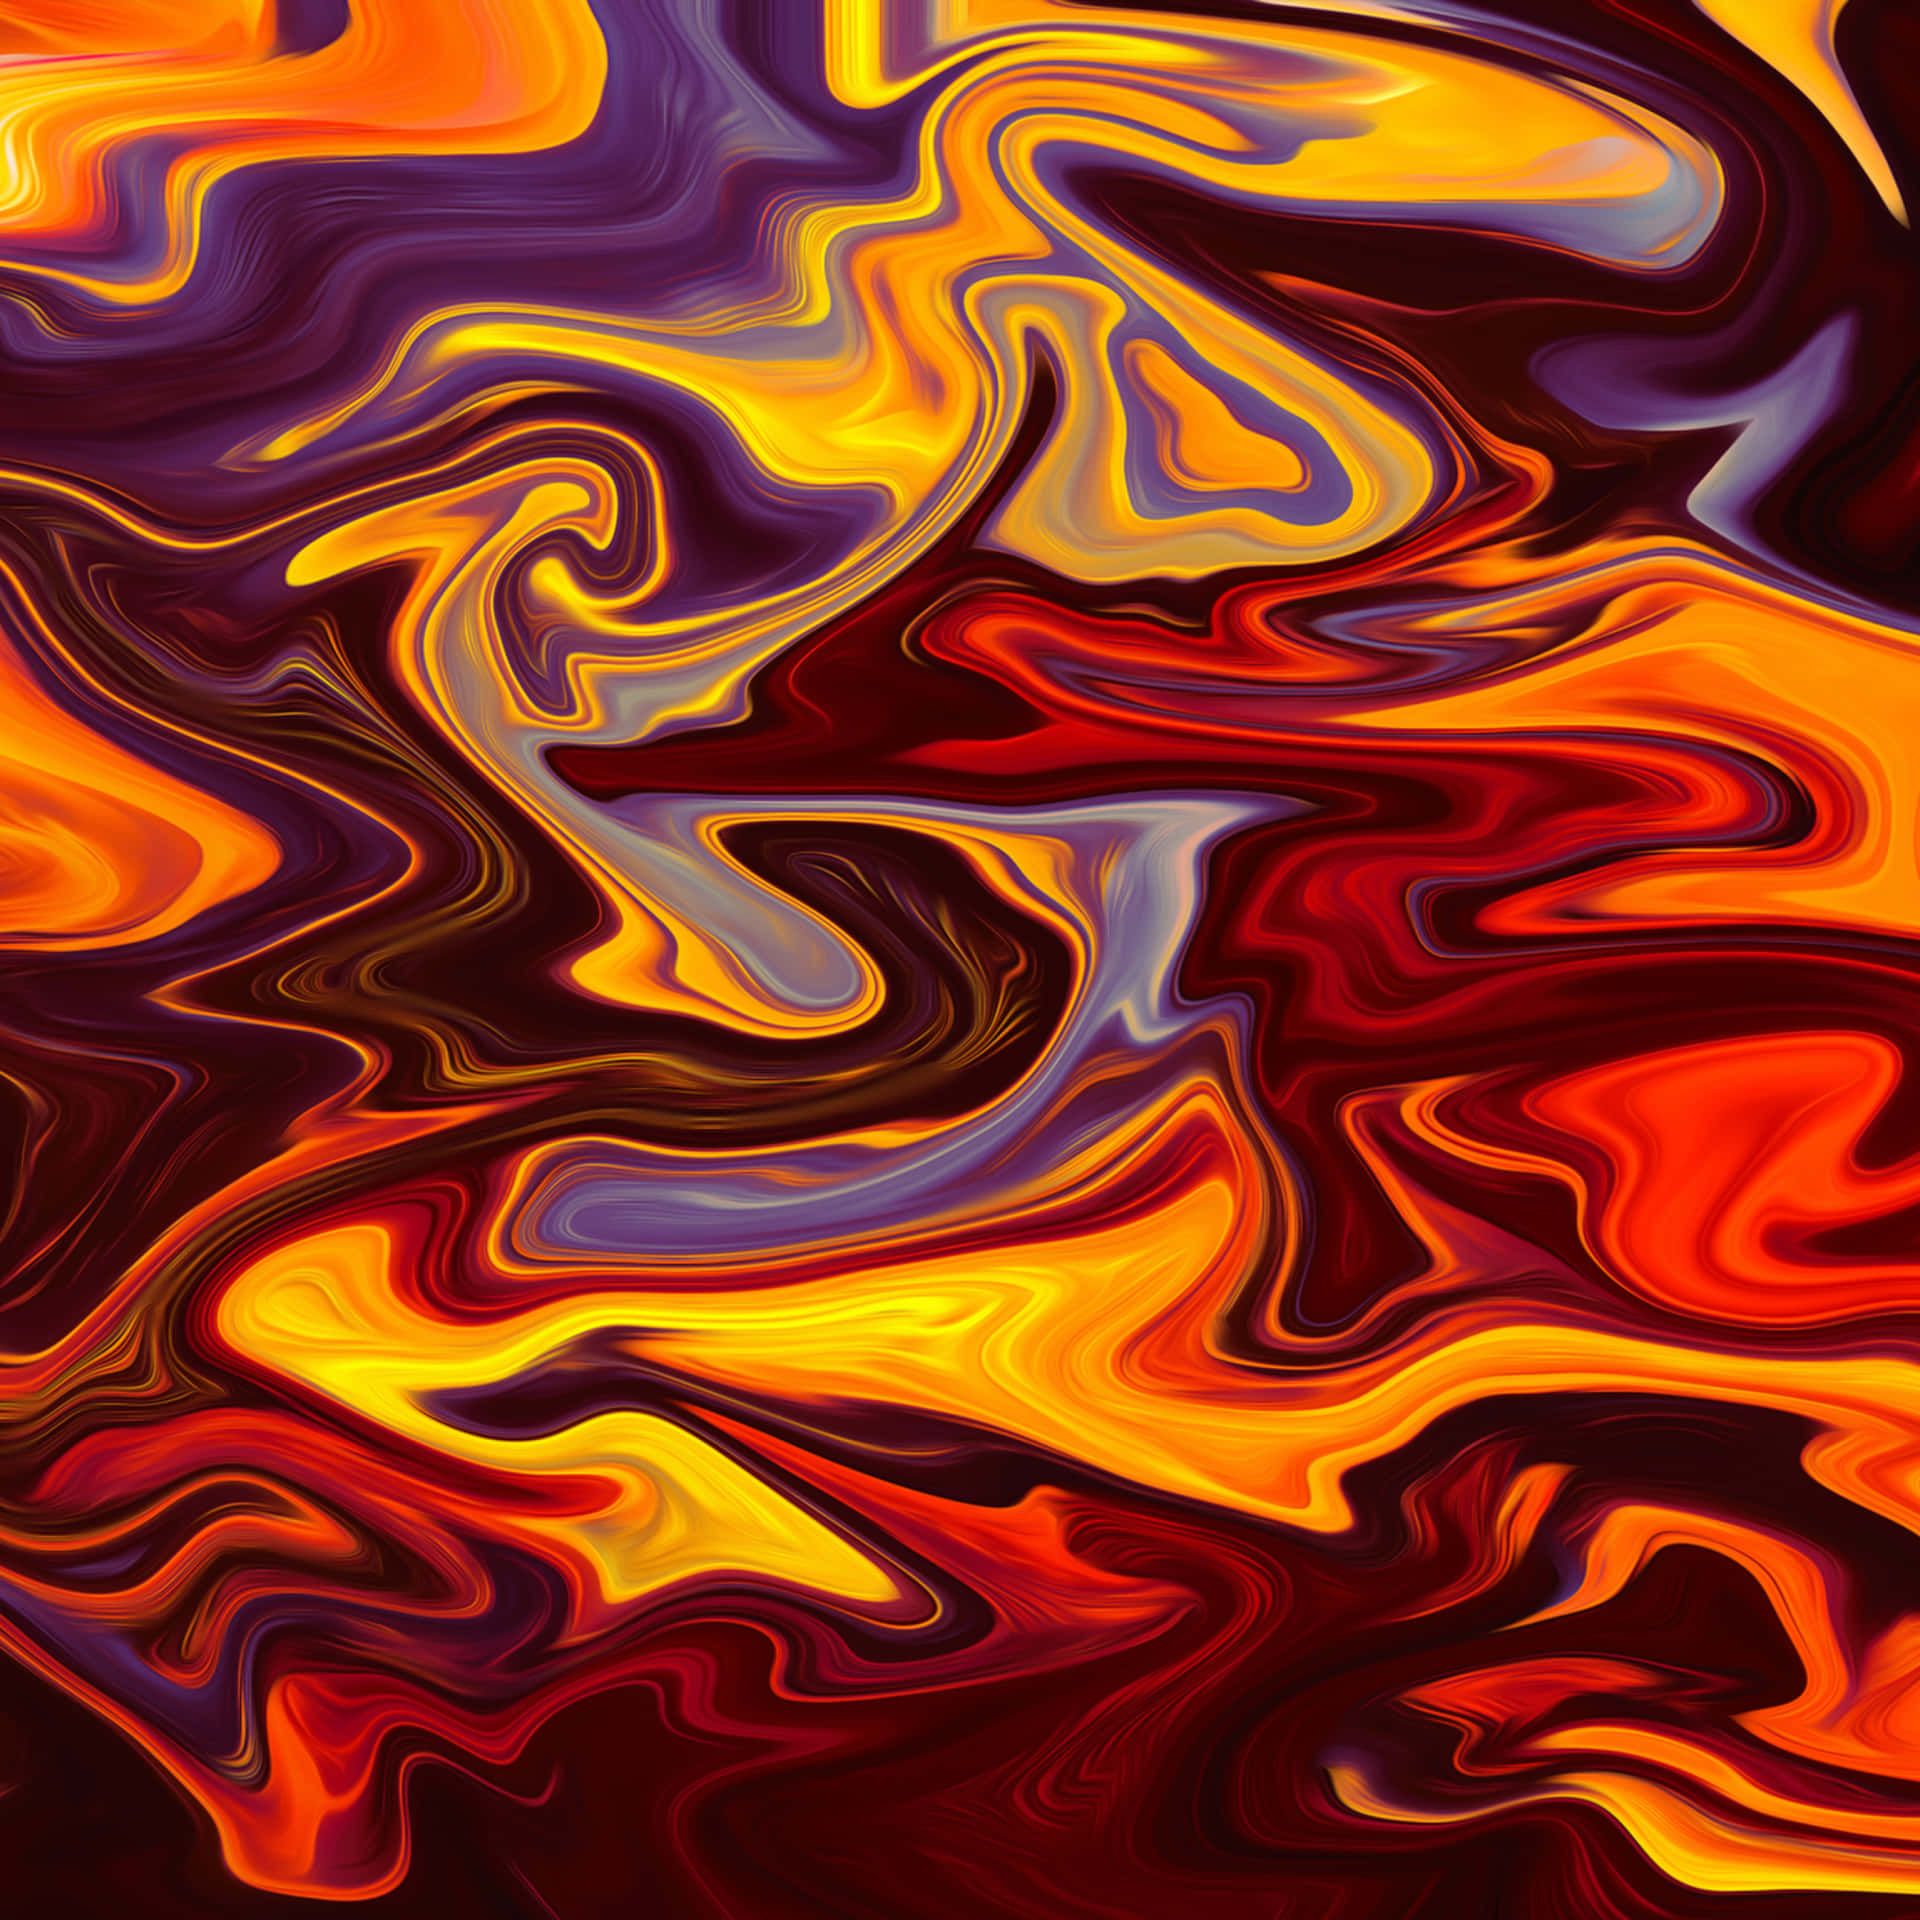 An Explosion of Red and Gold Wallpaper